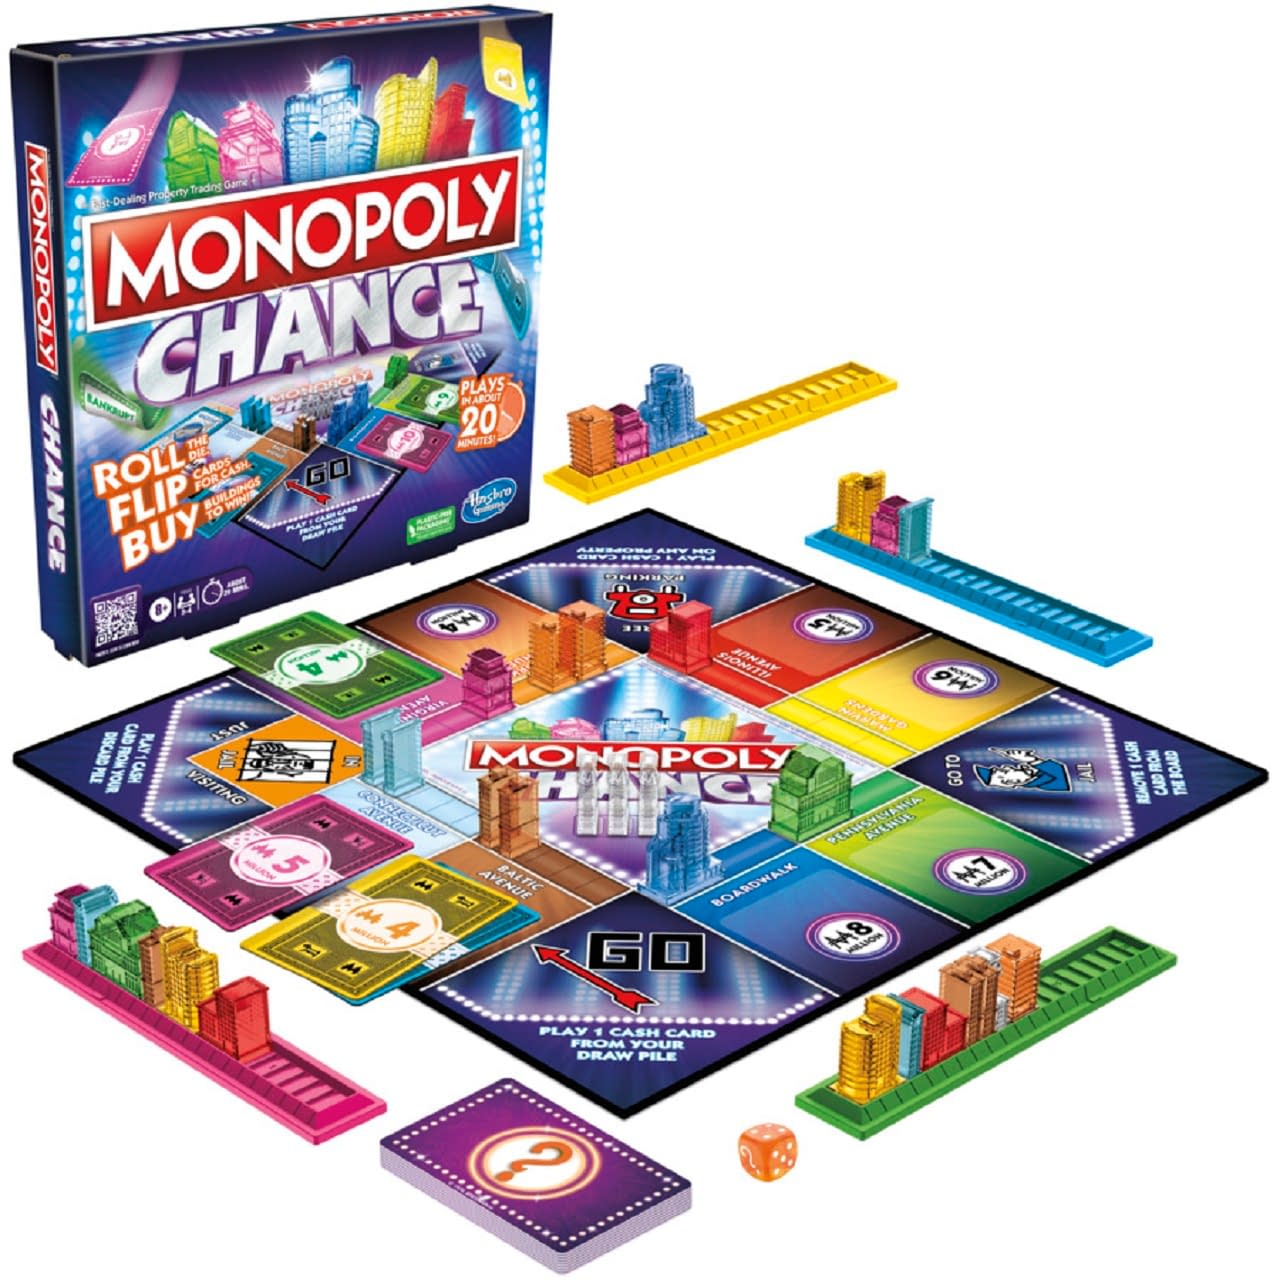 Hasbro Announces Two New Versions Of Clue Monopoly